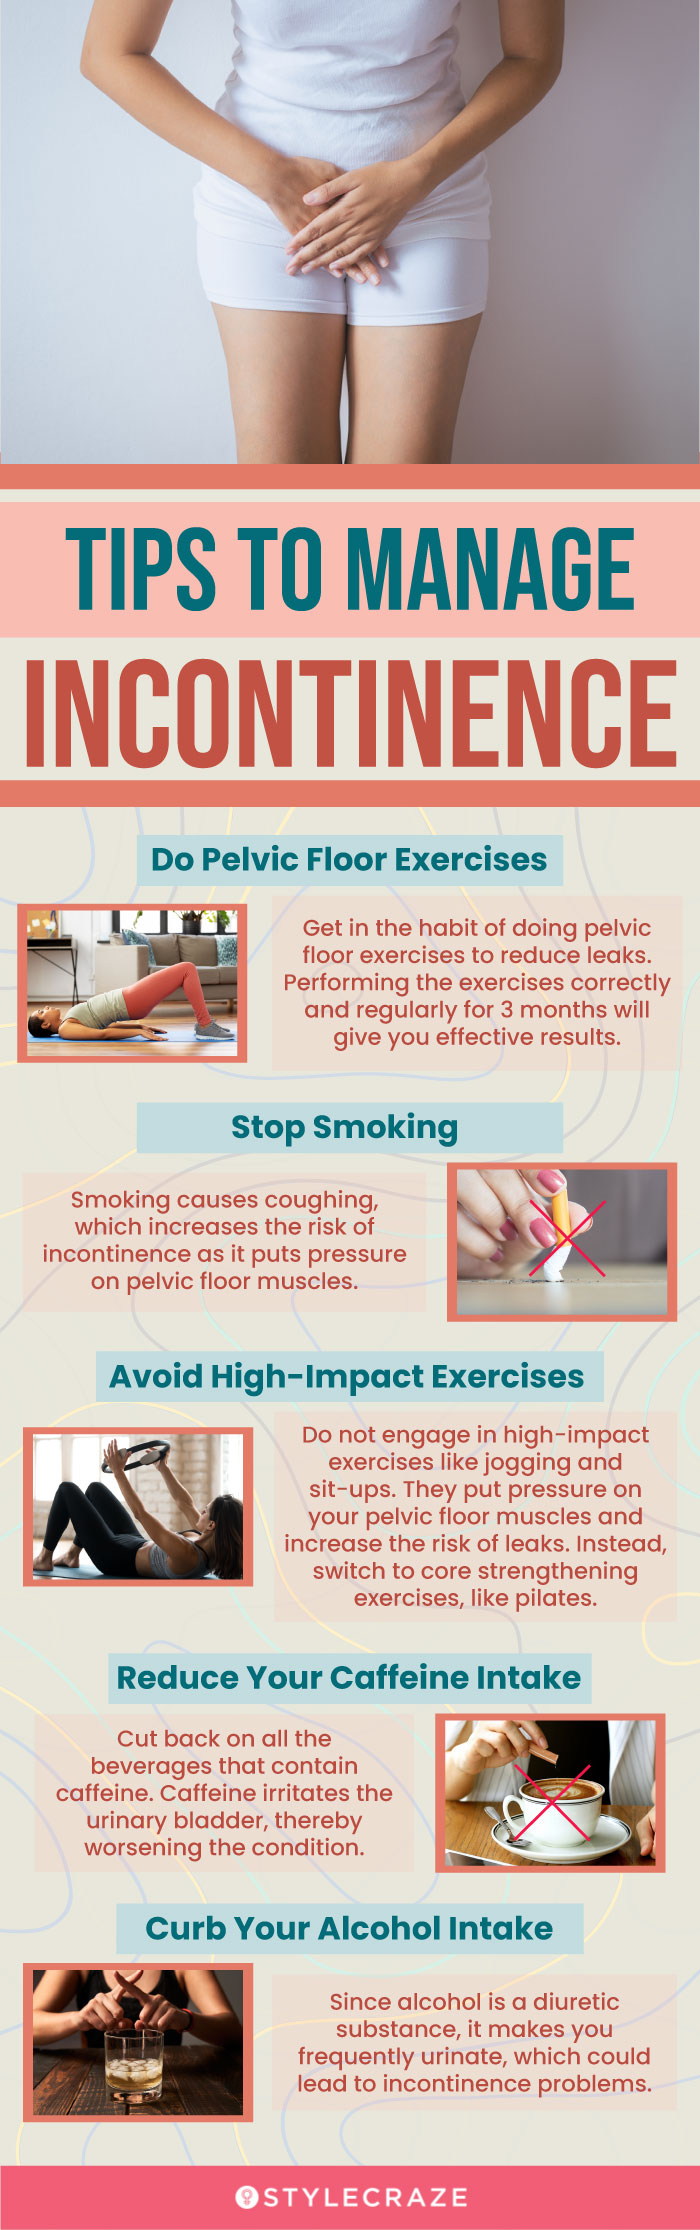 Tips To Manage Incontinence (infographic)